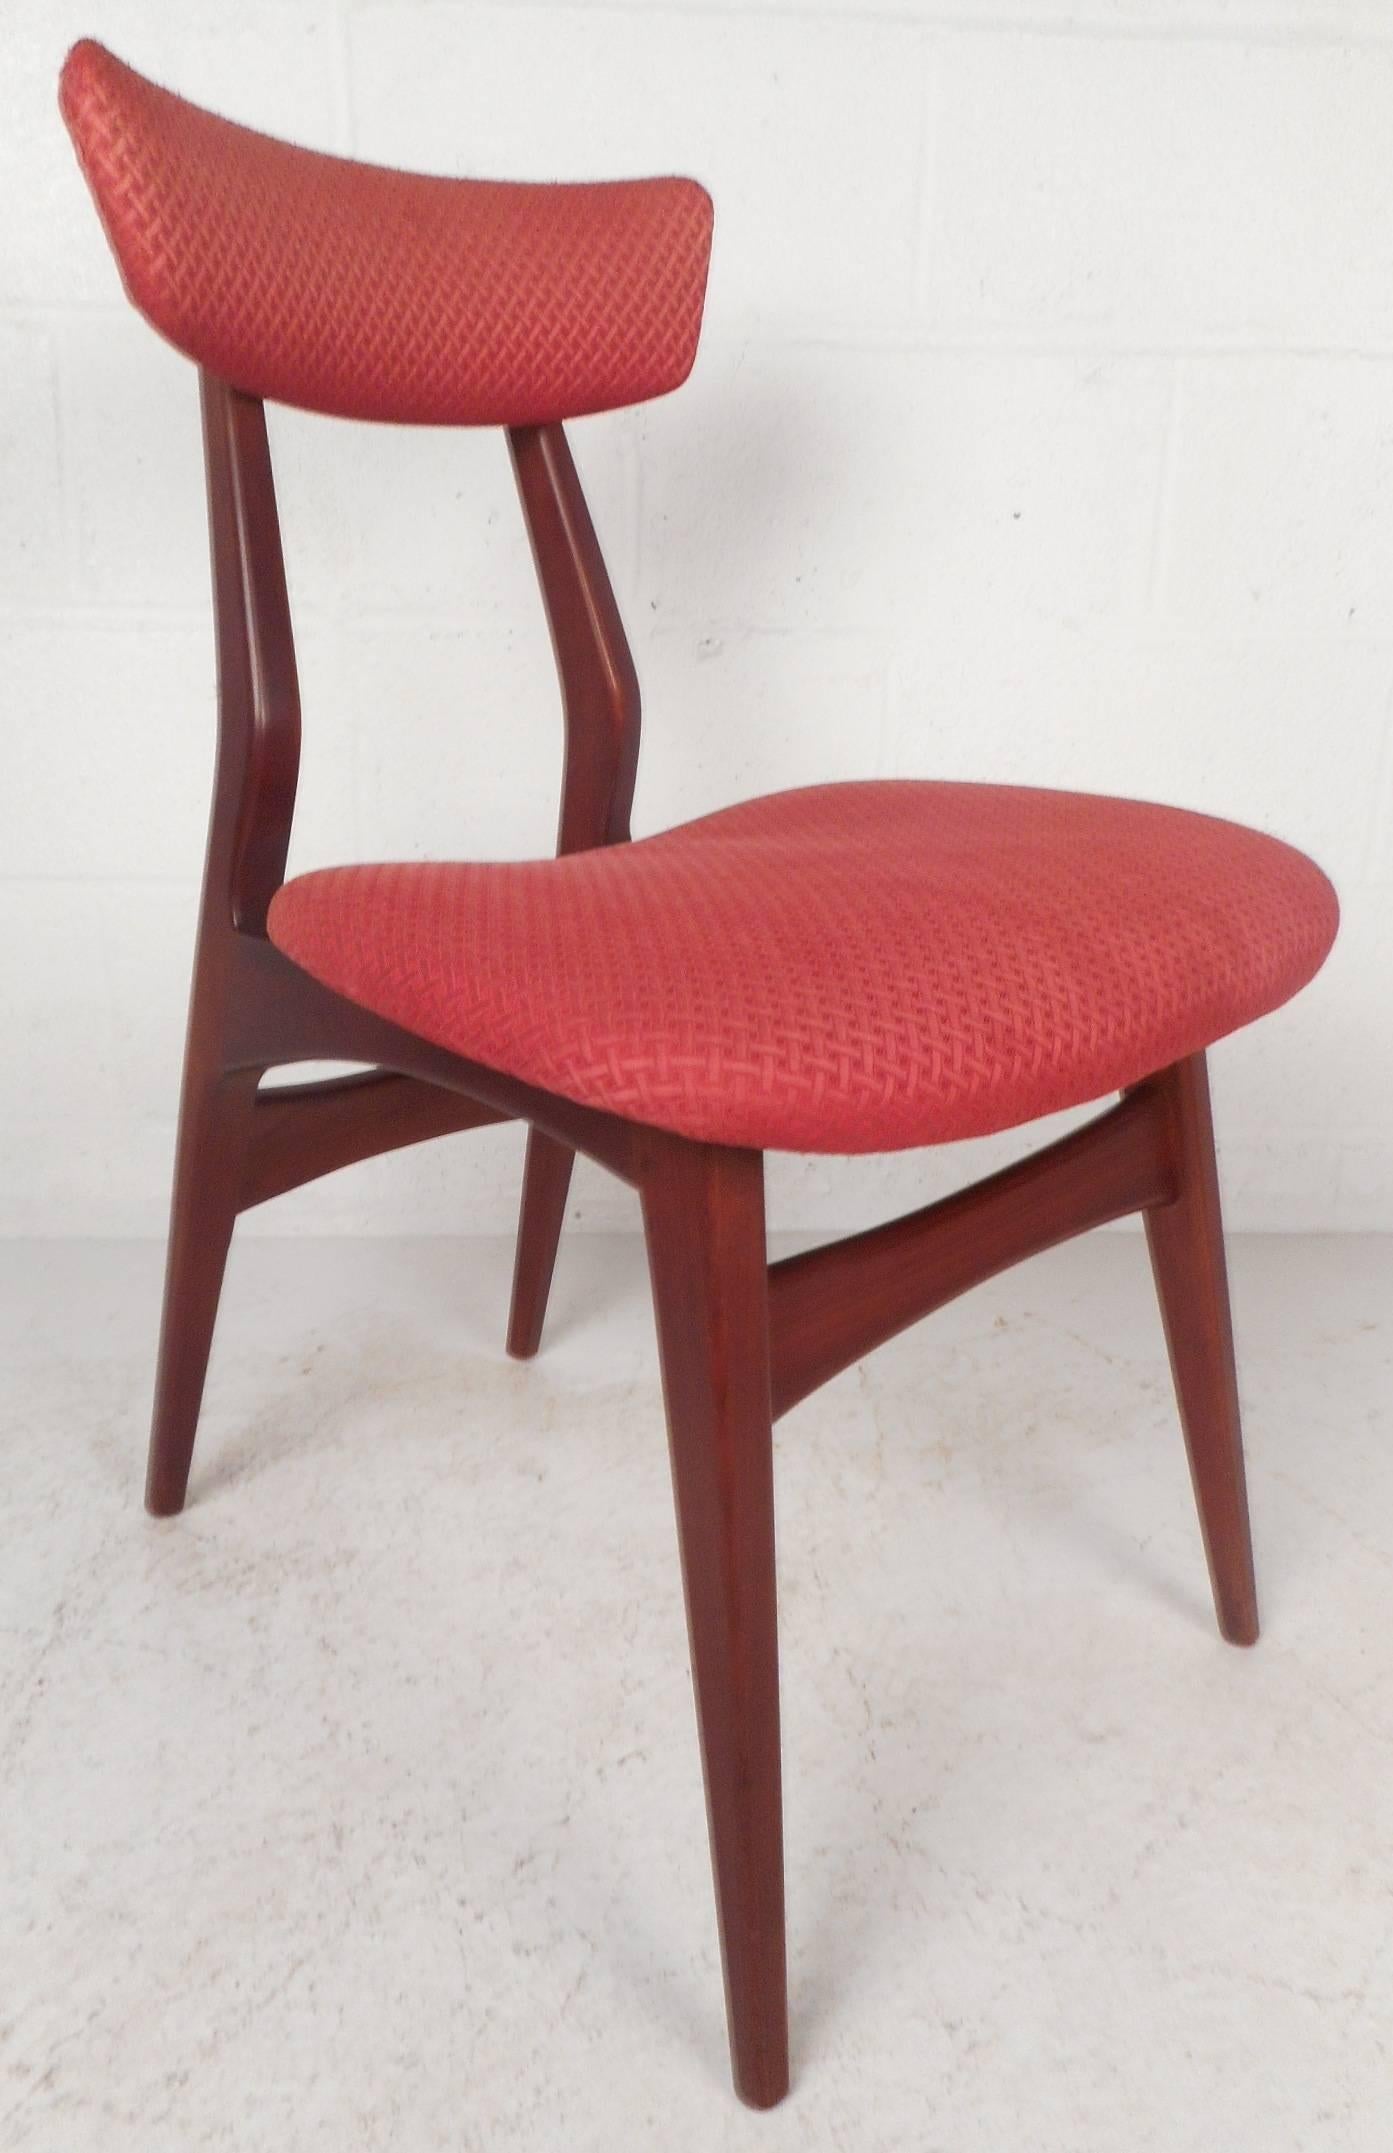 American Set of Four Mid-Century Modern Dining Chairs by George Nelson for Herman Miller